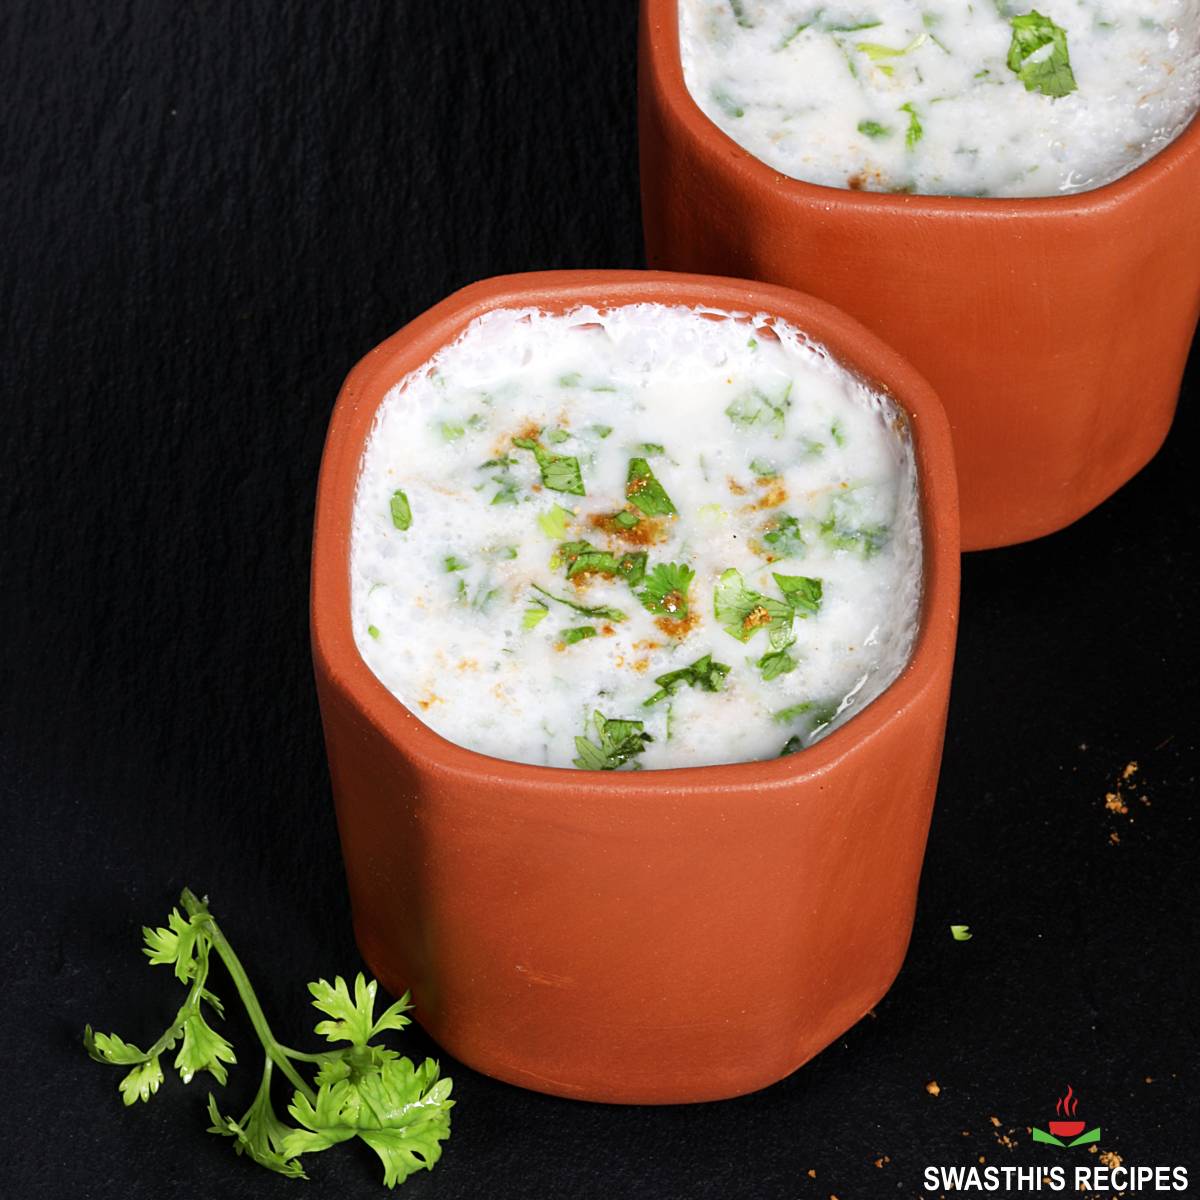 Chaas recipe made with yogurt and spices